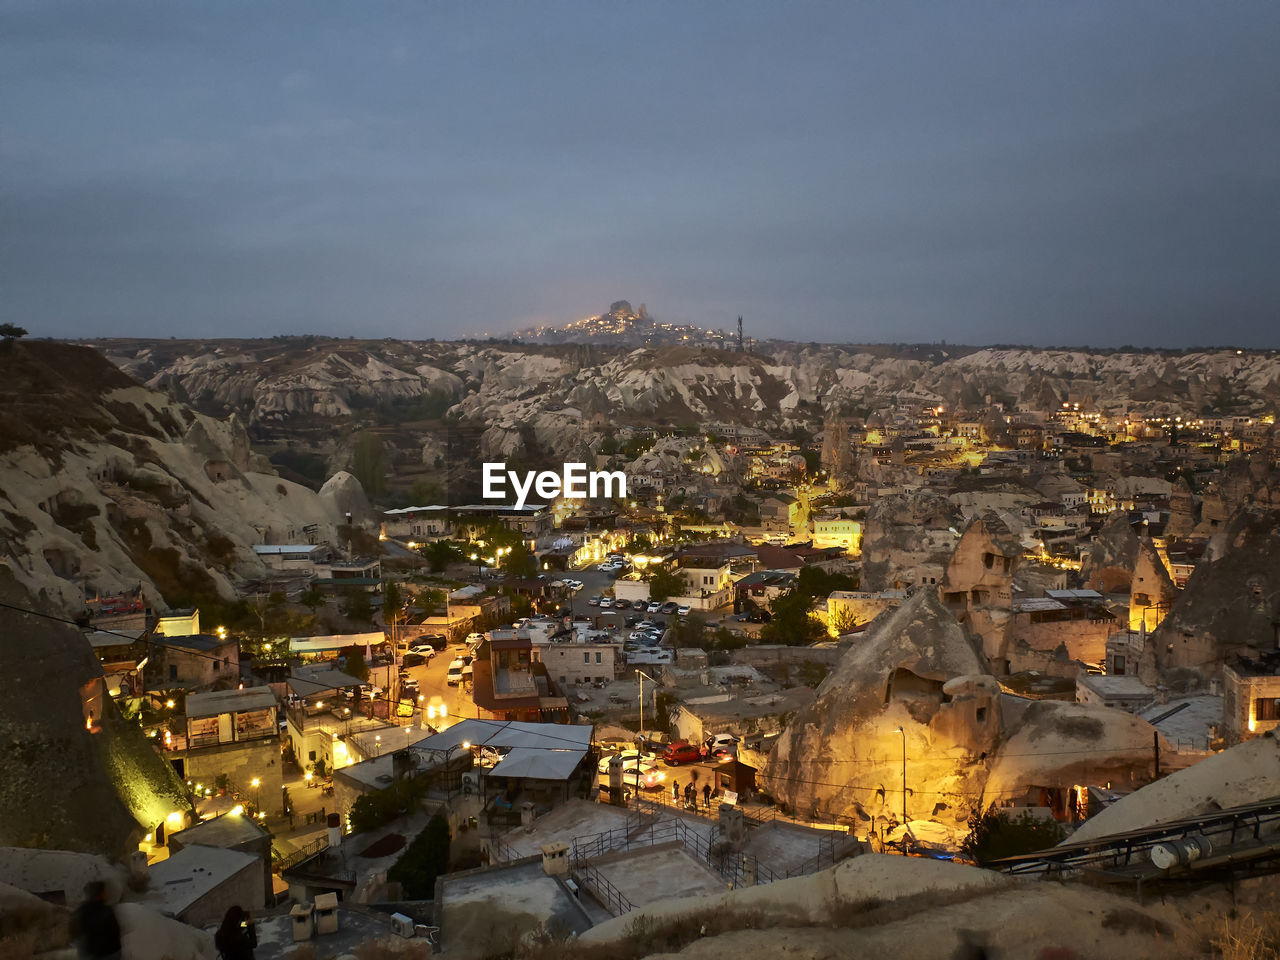 Cave houses and volcanic landscape of cappadocian town goreme and uchisar castle at the horizon